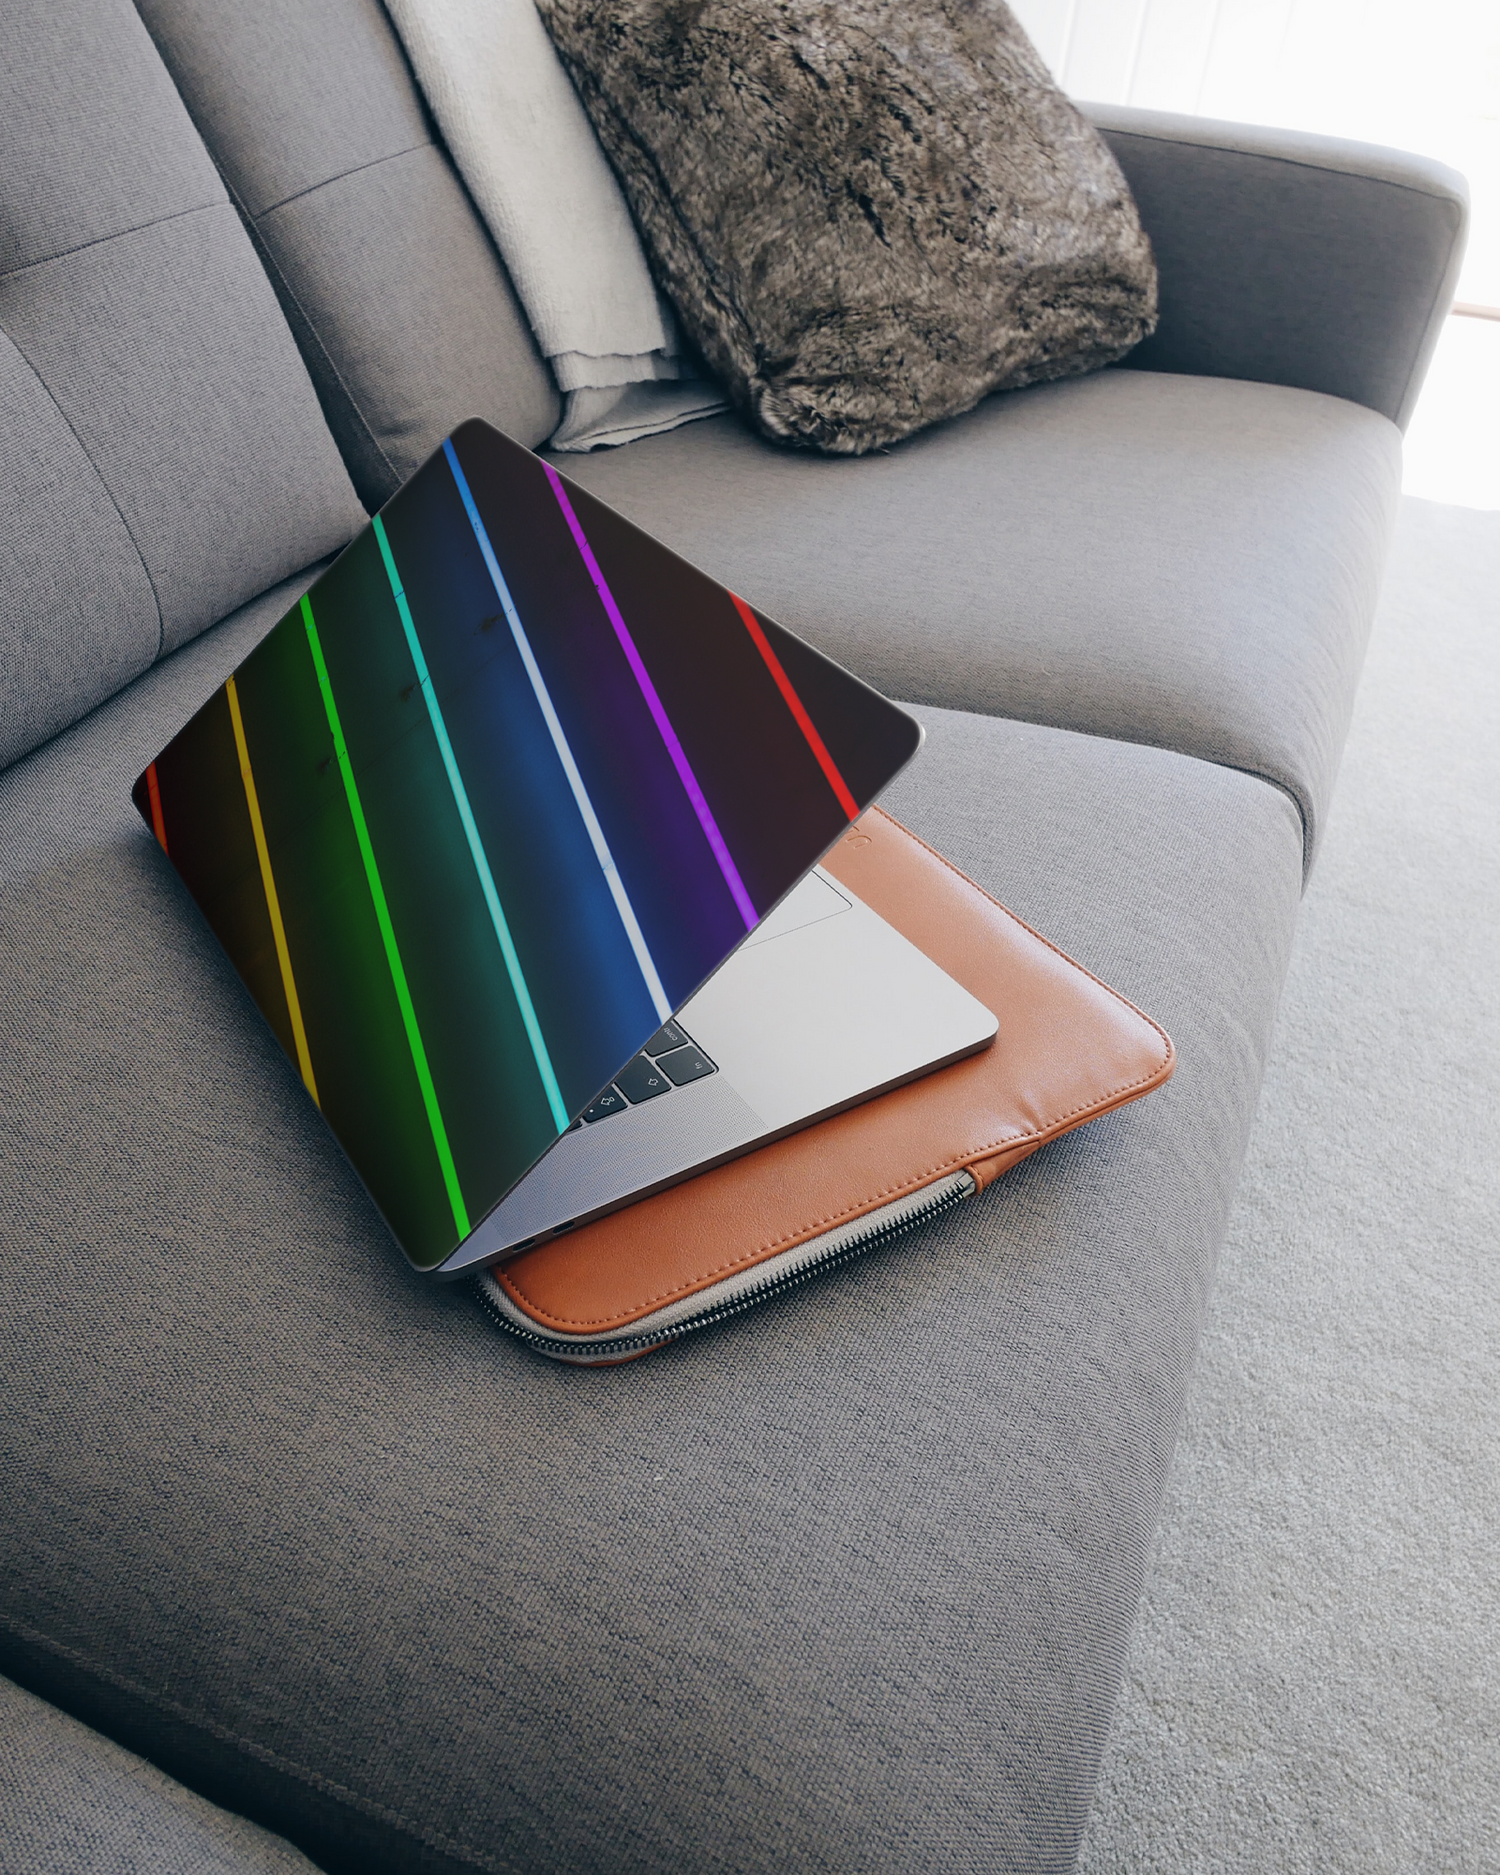 LGBTQ Laptop Skin for 15 inch Apple MacBooks on a couch